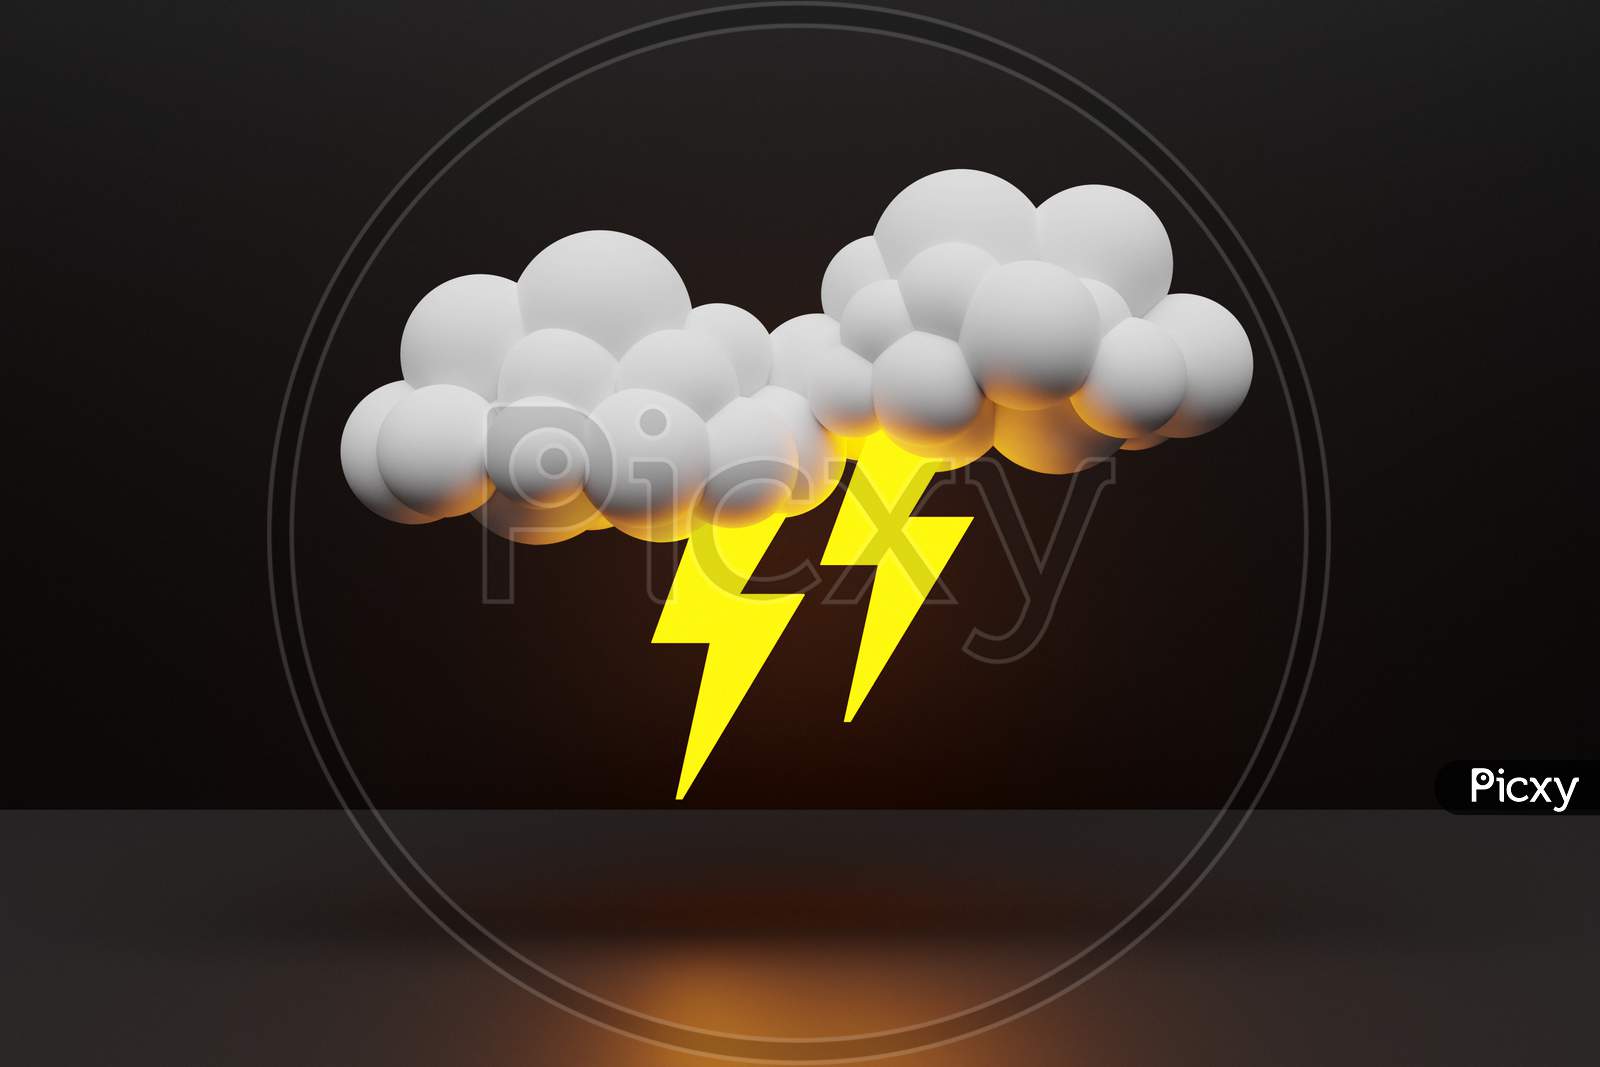 3D Illustration Of Clouds With Lightning   On A Black  Isolated Background. Weather Forecast Icons, Regular Season Clouds